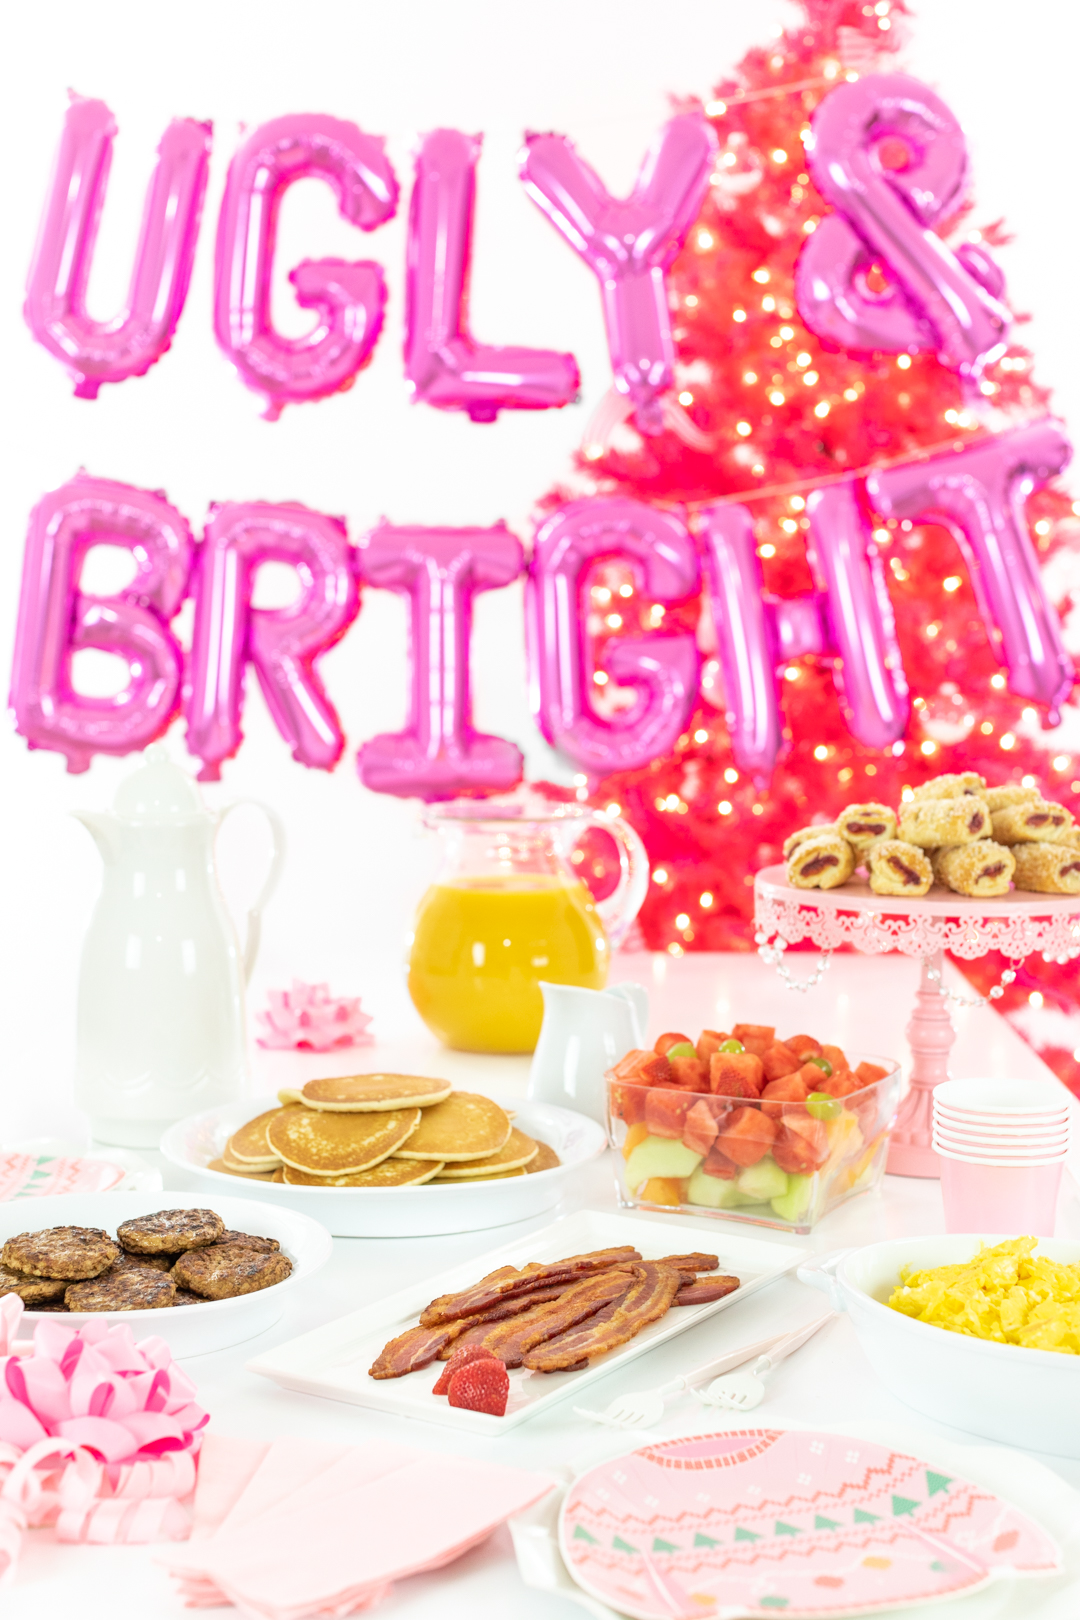 Fun holiday brunch spread with ugly & bright balloons and classic brunch ingredients.